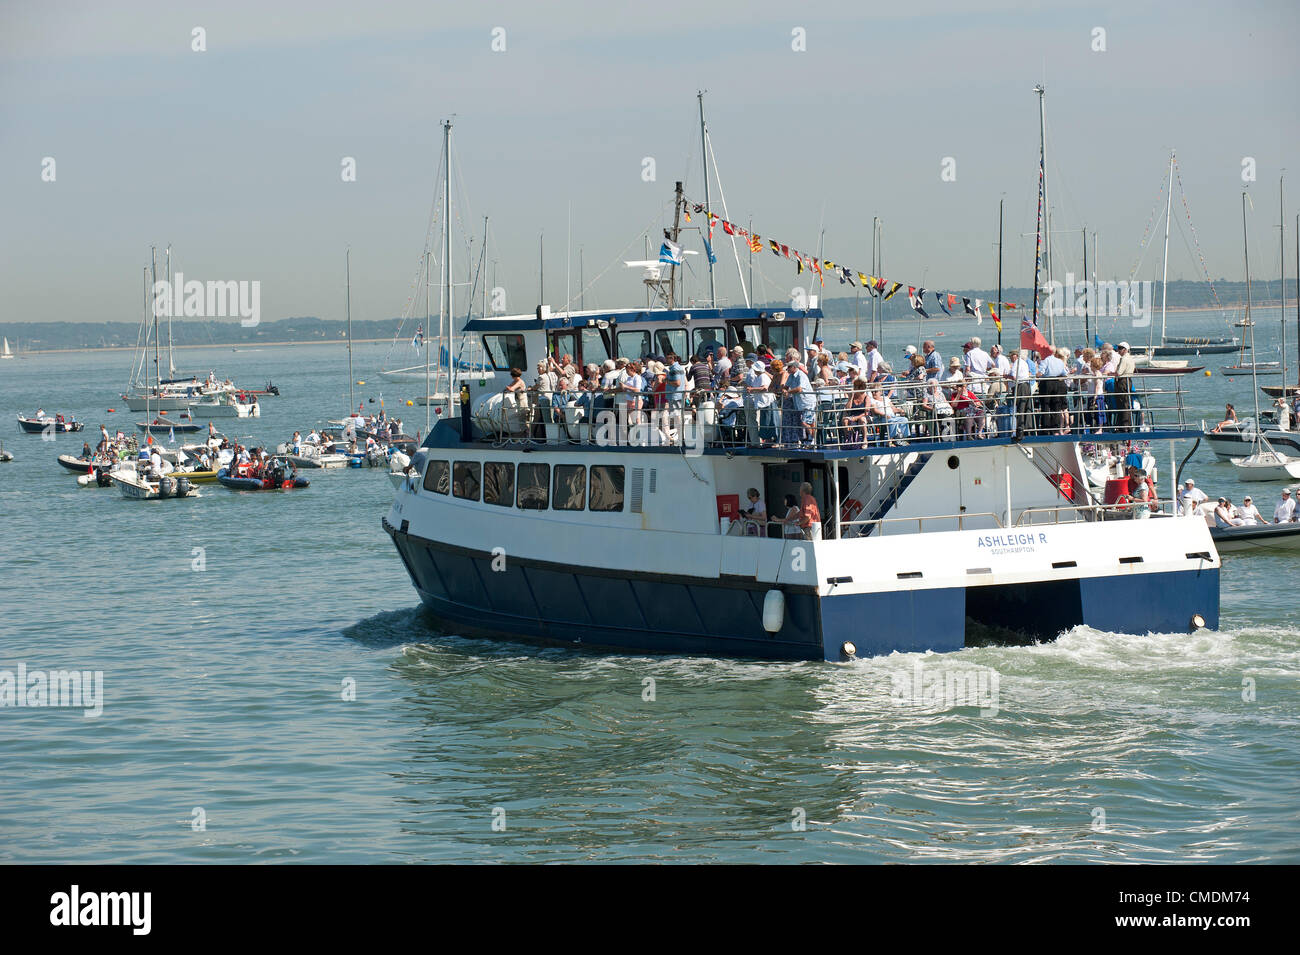 Spectators crowded on a boat tour aboard The Ashleigh trip vessel in Cowes Harbour waiting to see the Queen on the last day of her Diamond Jubilee tour Stock Photo